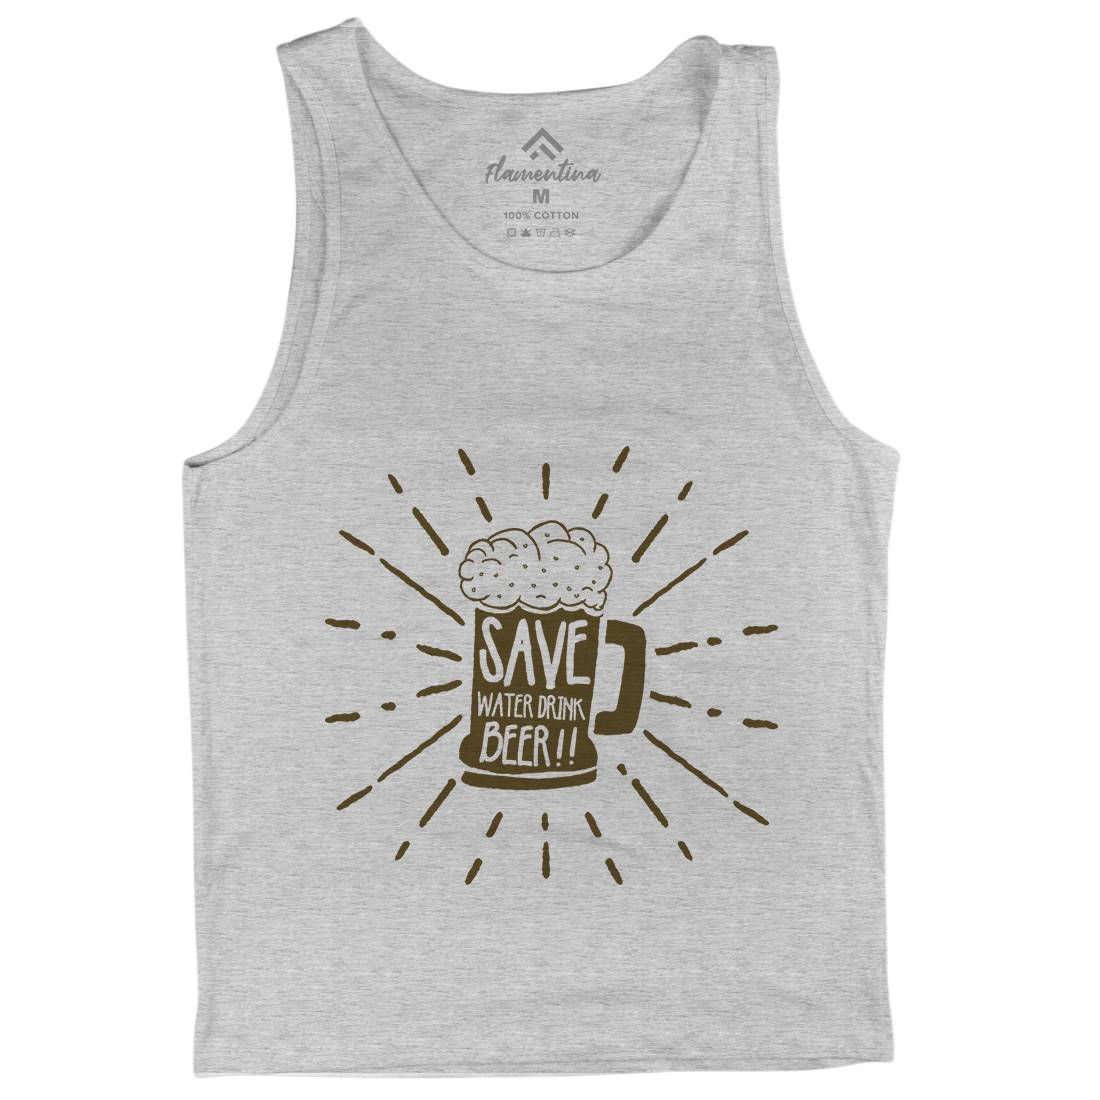 Save Water Mens Tank Top Vest Drinks A368